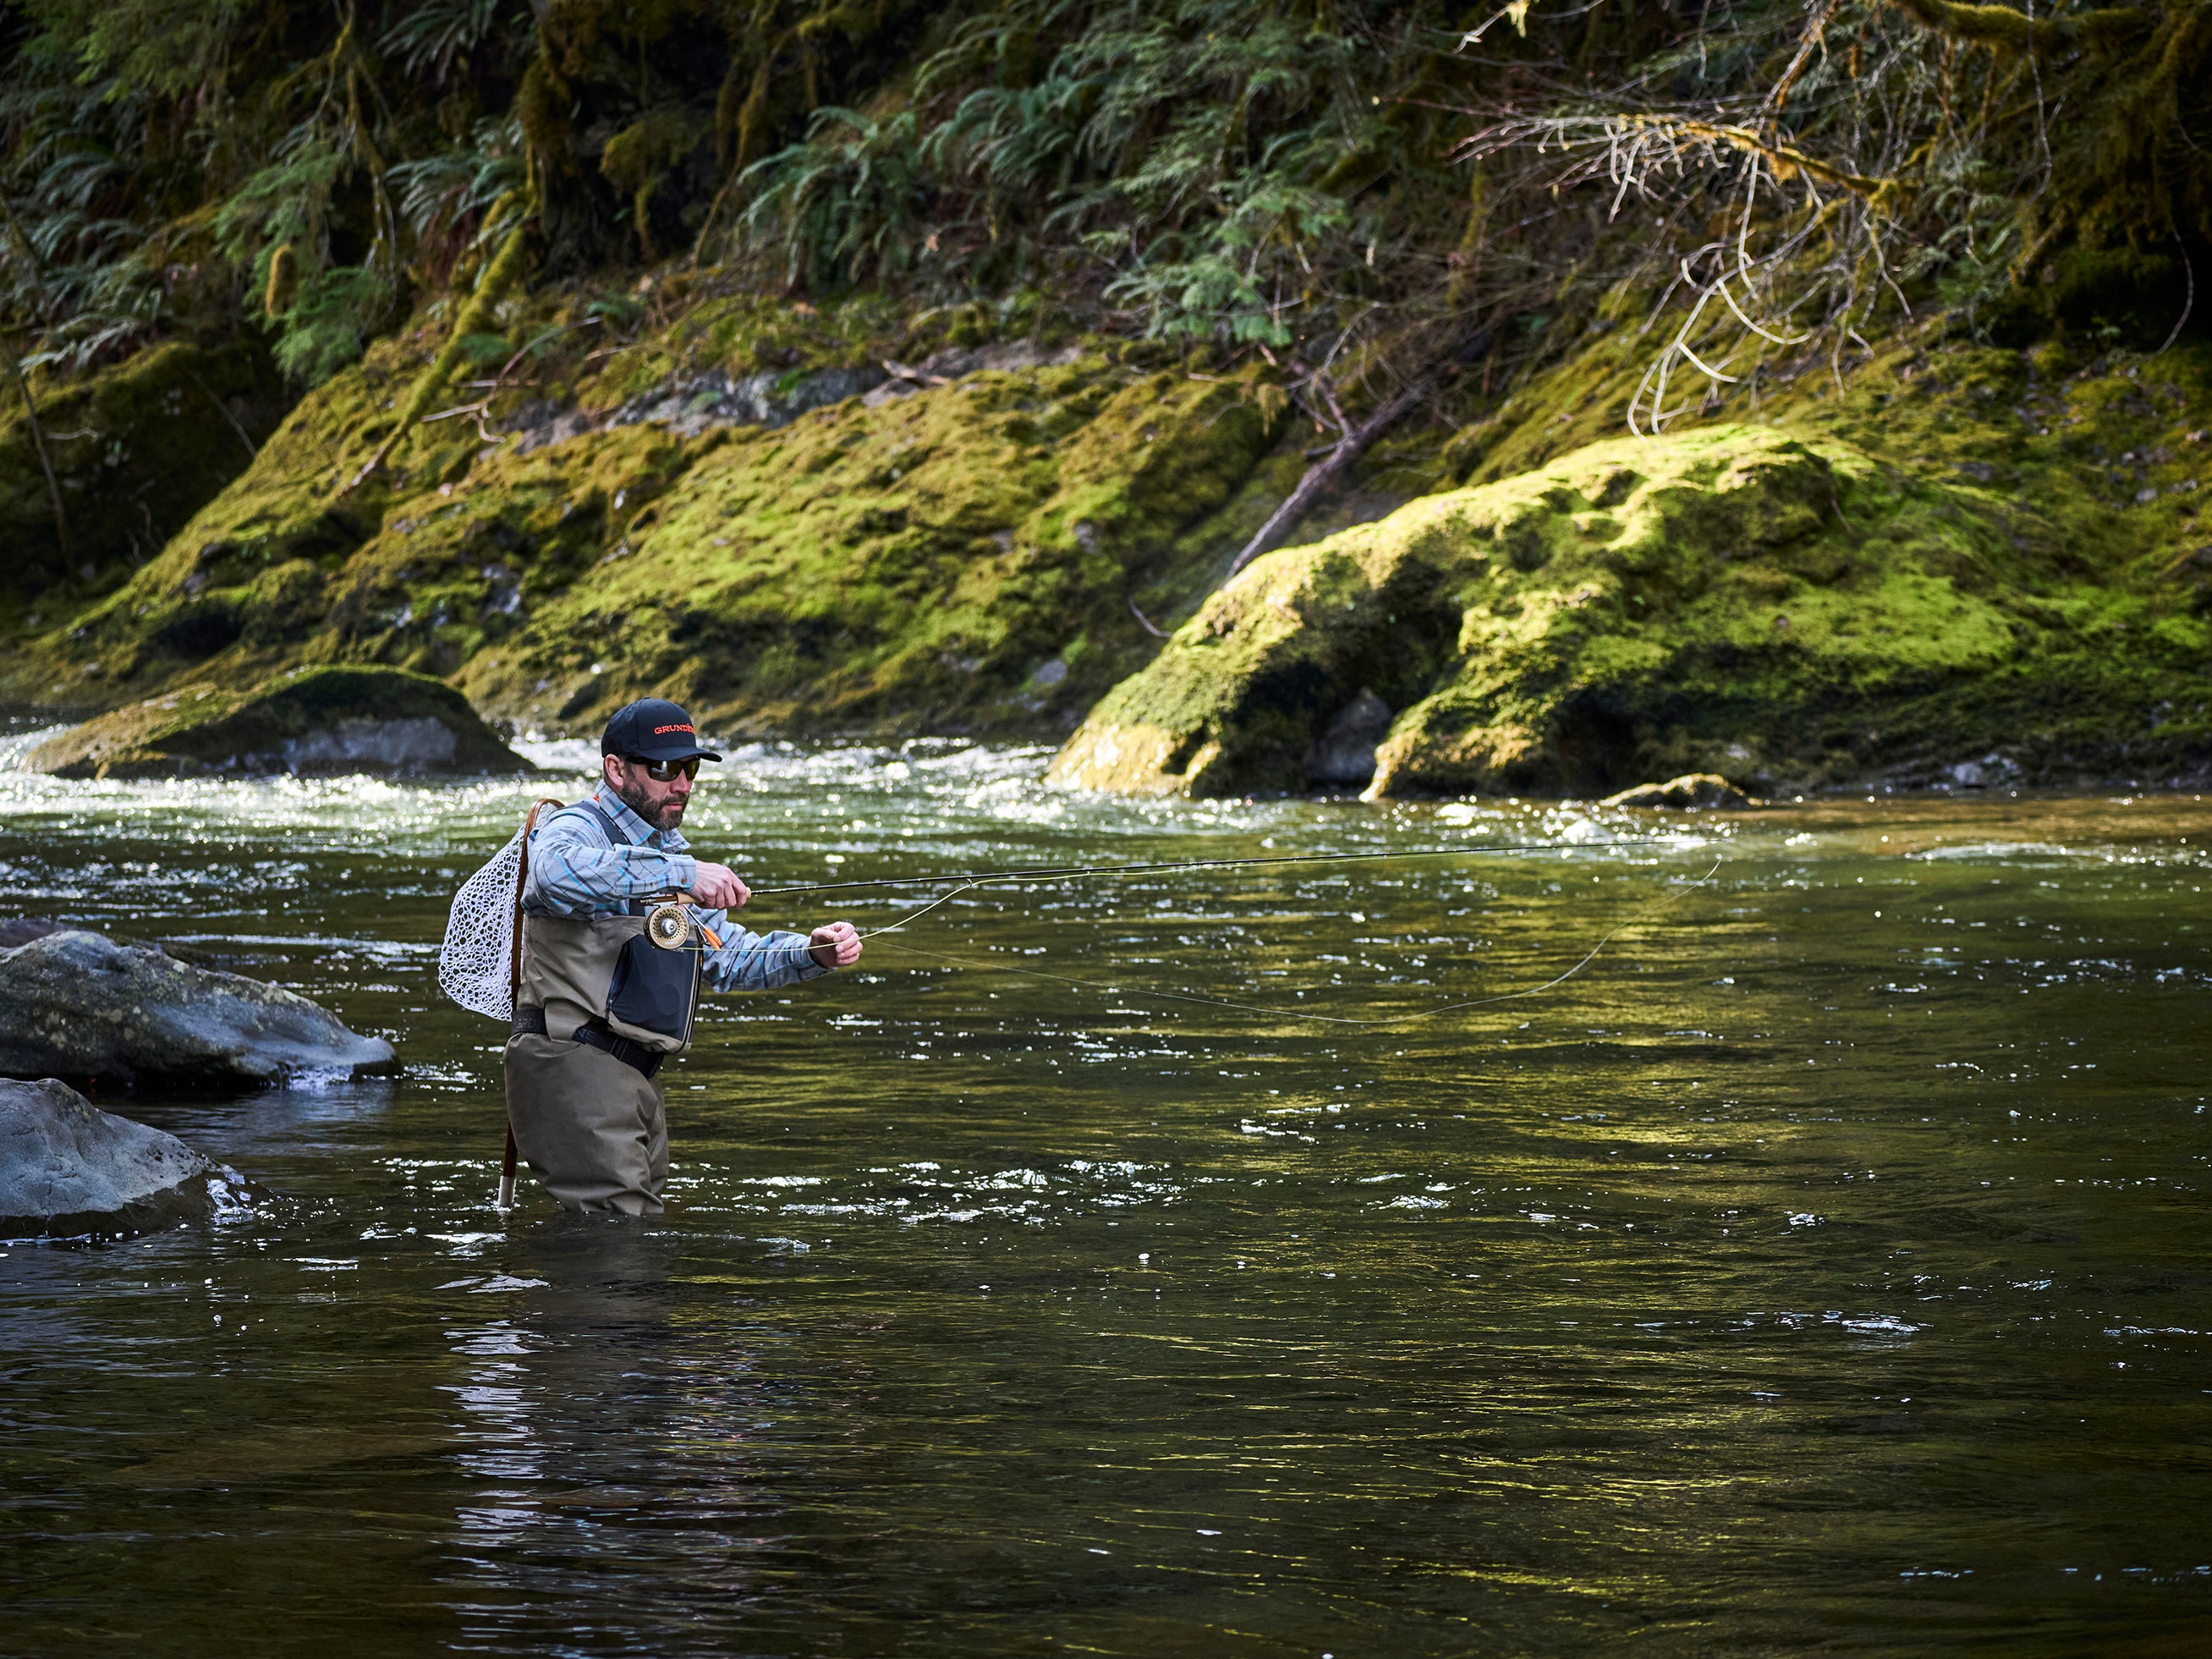 Article from: In the Loop Fly Fishing Magazine - Issue 36